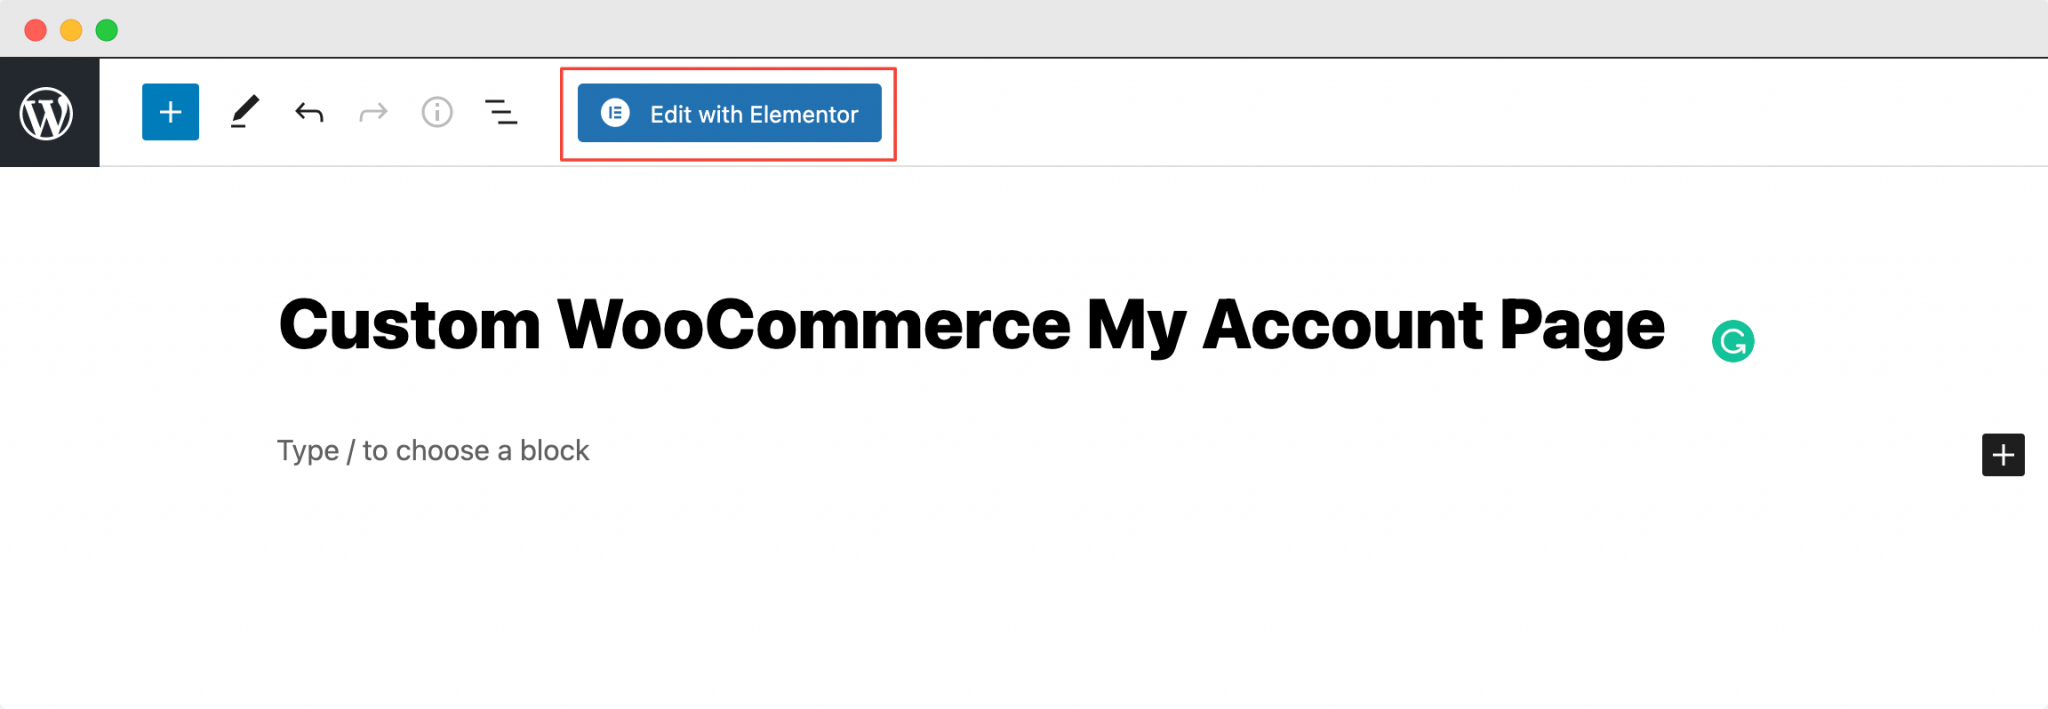 How To Customize The Woocommerce My Account Page Using Elementor Step By Step Guide 4362